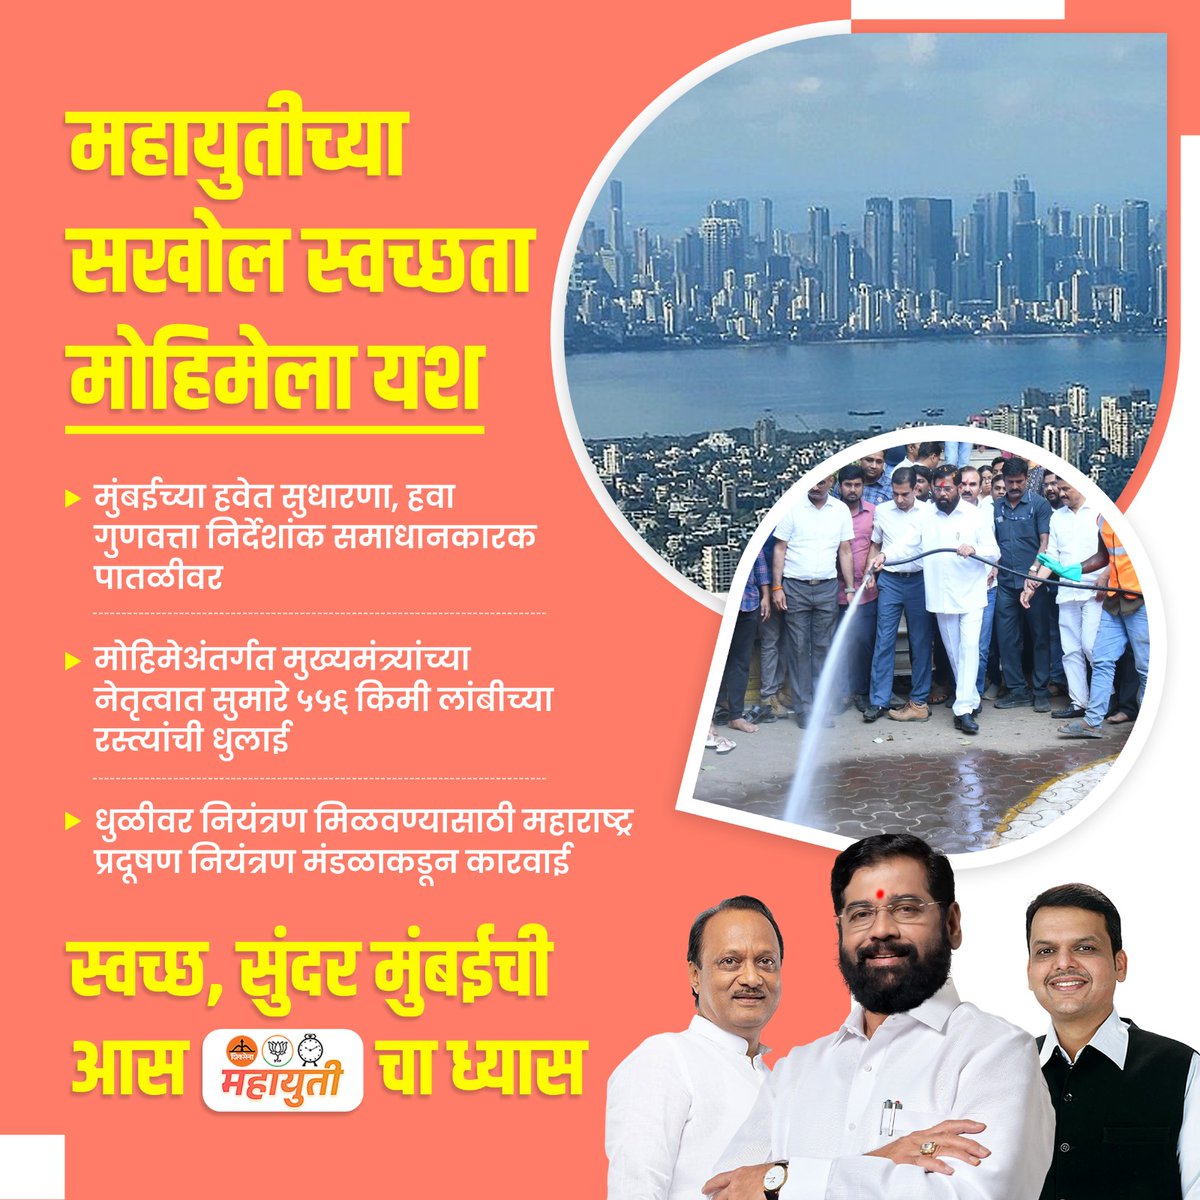 Mahayuti's deep cleaning campaign achieves remarkable success as Mumbai witnesses improved air quality, with the AQI reaching satisfactory levels. Kudos to CM Eknath Shinde's government for their proactive measures towards cleaner air and a healthier environment!